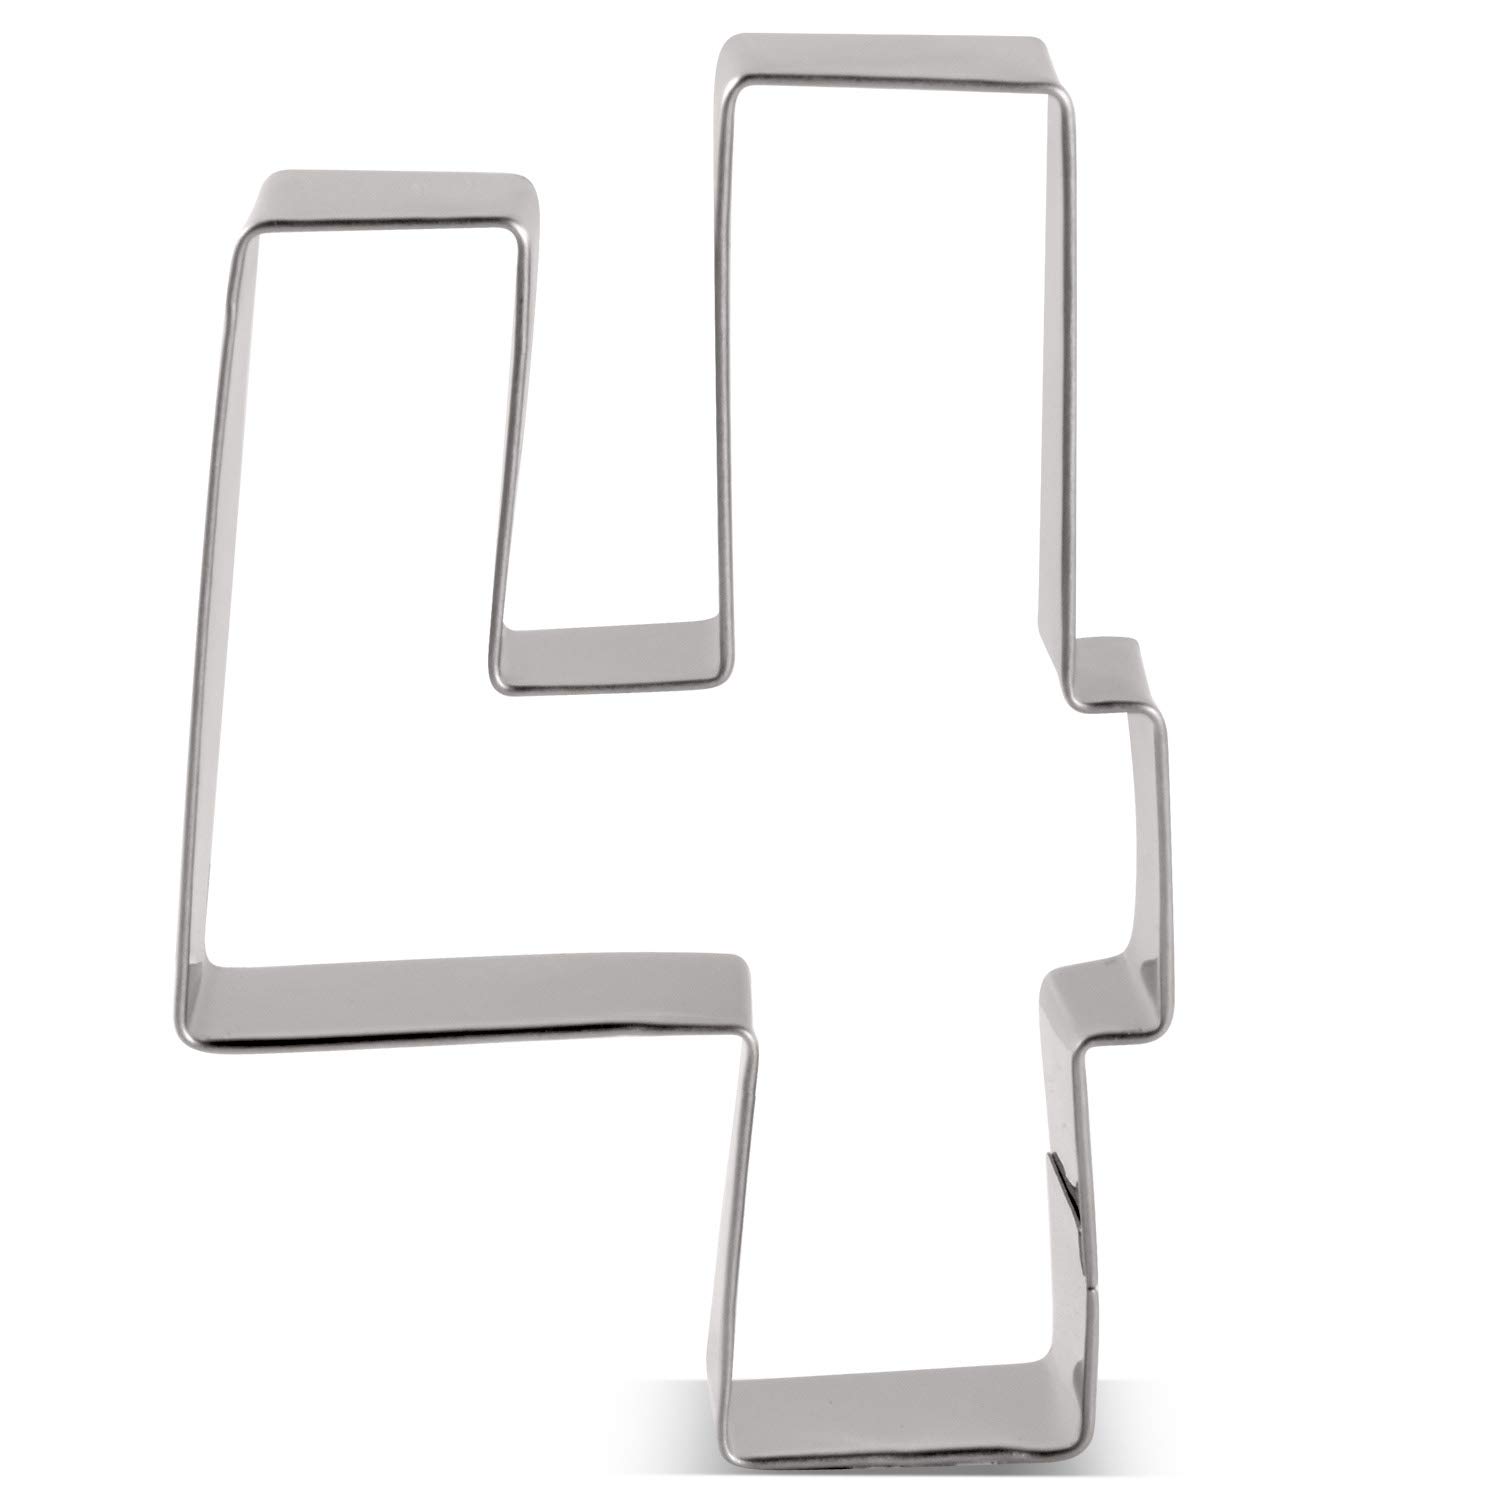 LILIAO Number 4 Cookie Fondant Biscuit Cutter for Birthday/Anniversary/Special Day - 2.6 x 3.6 inches - Stainless Steel